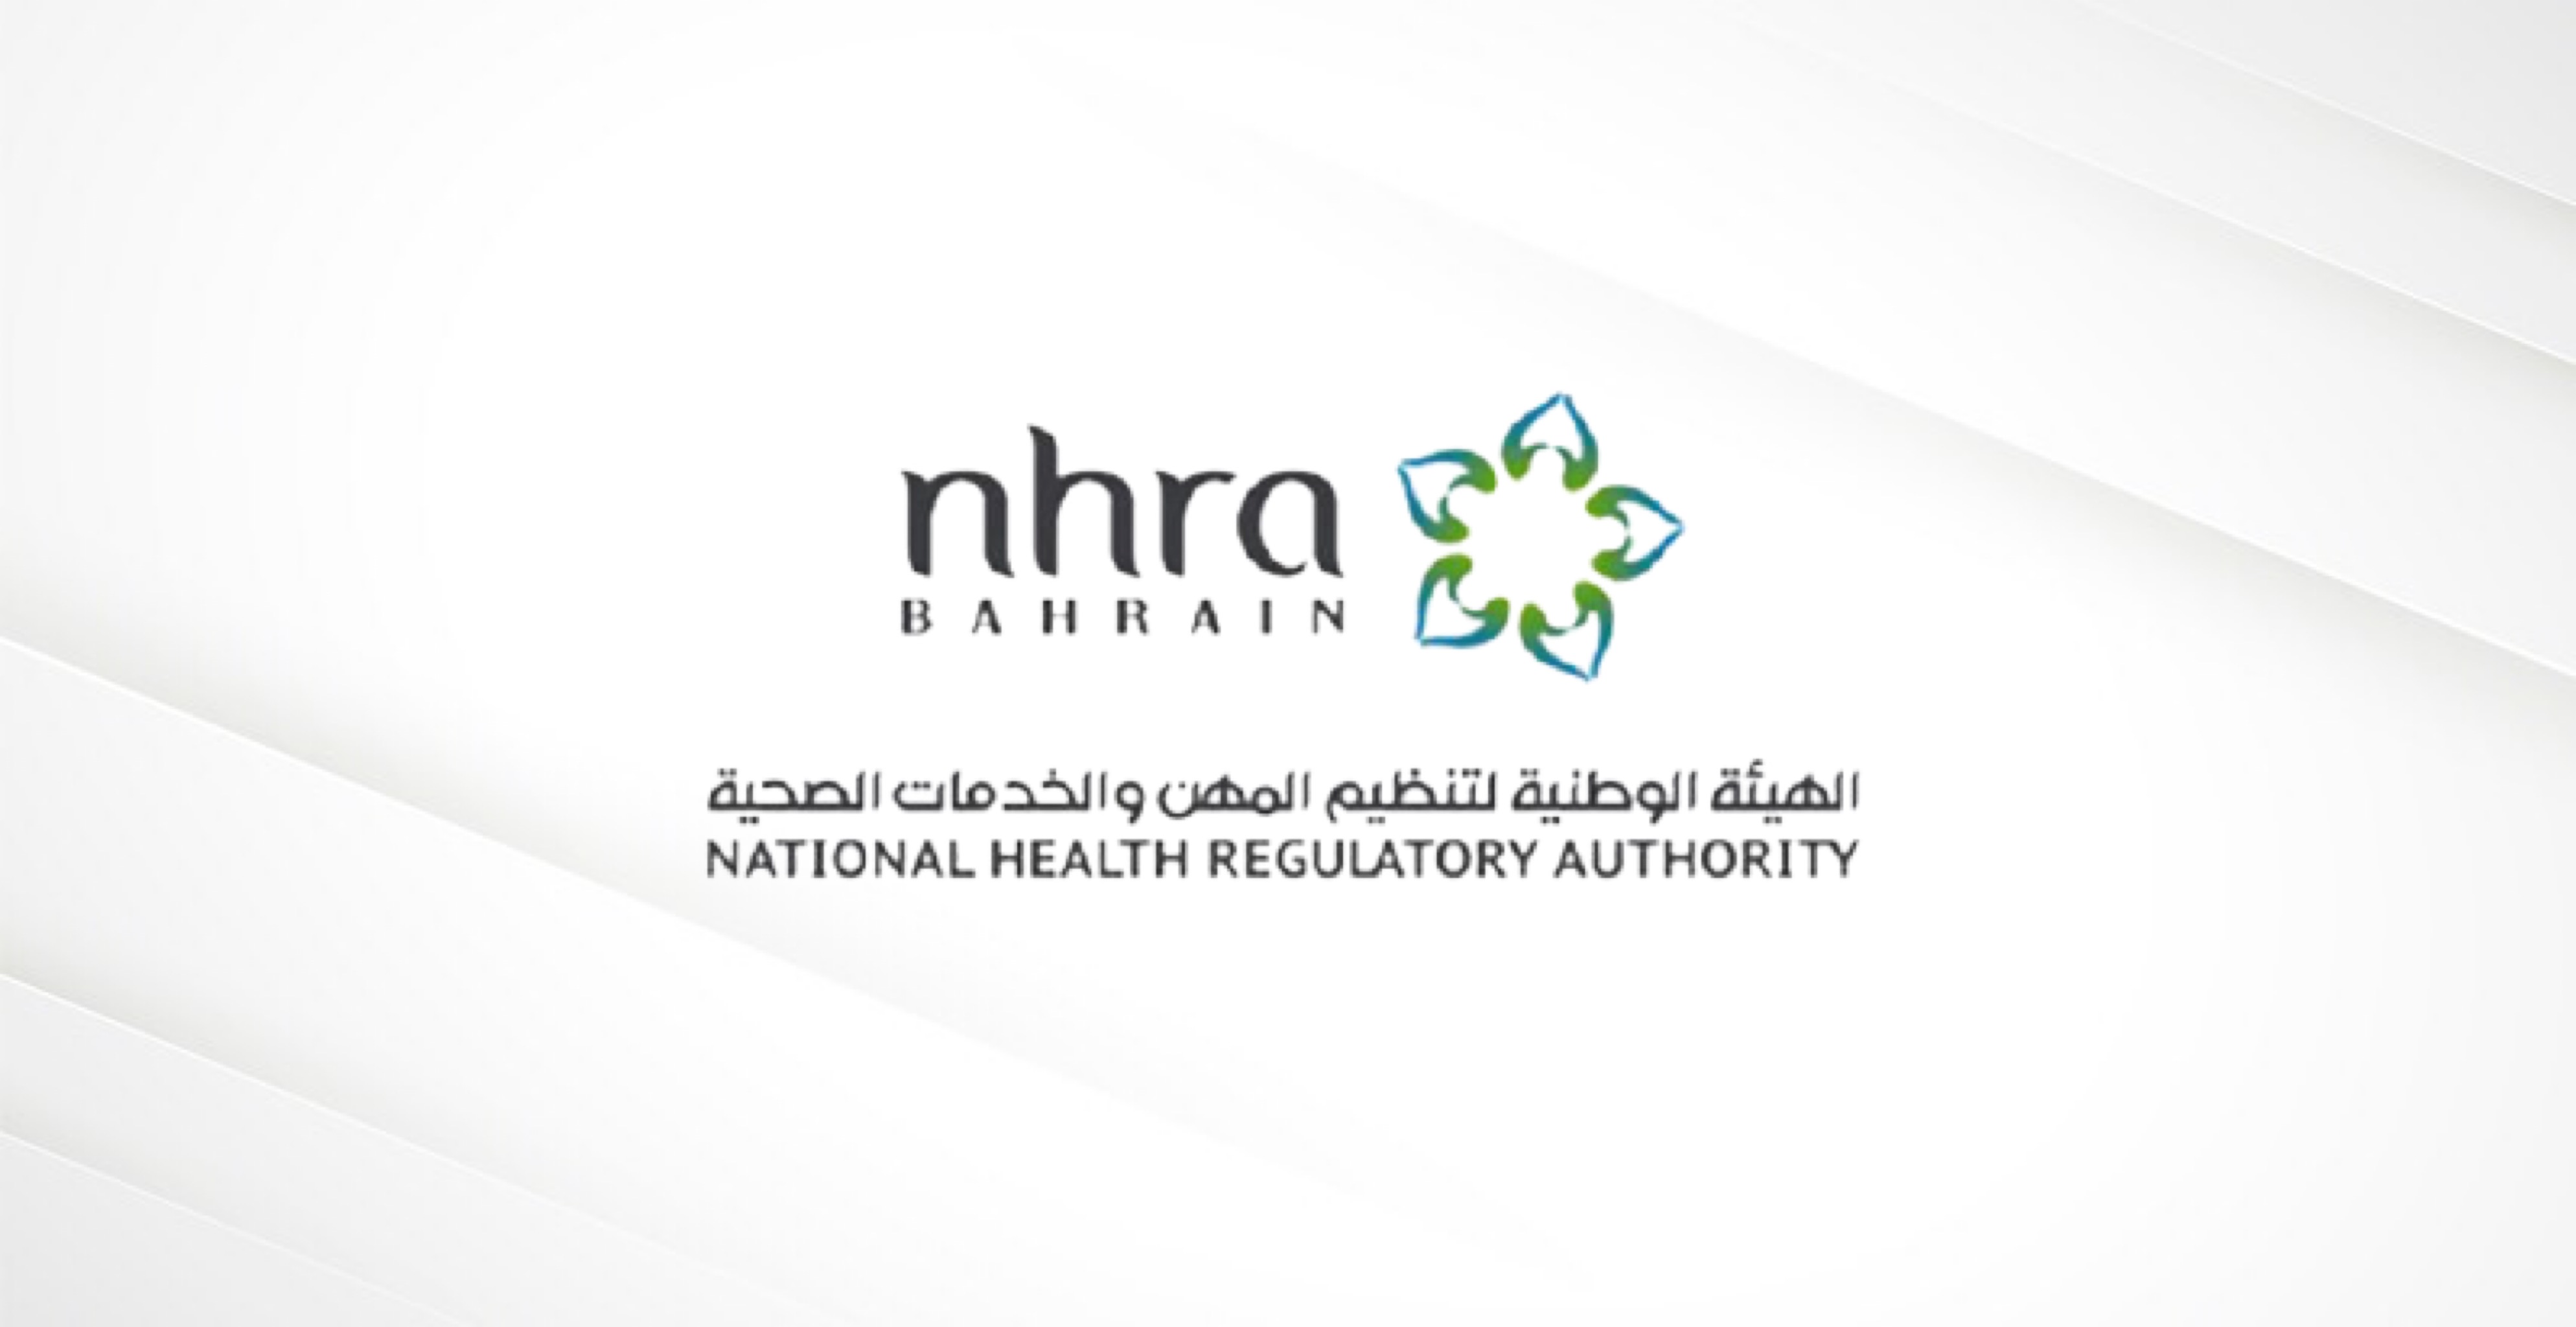 The Kingdom of Bahrain authorises the emergency use of the Pfizer-BioNTech vaccine for children aged 5 to 11 years old